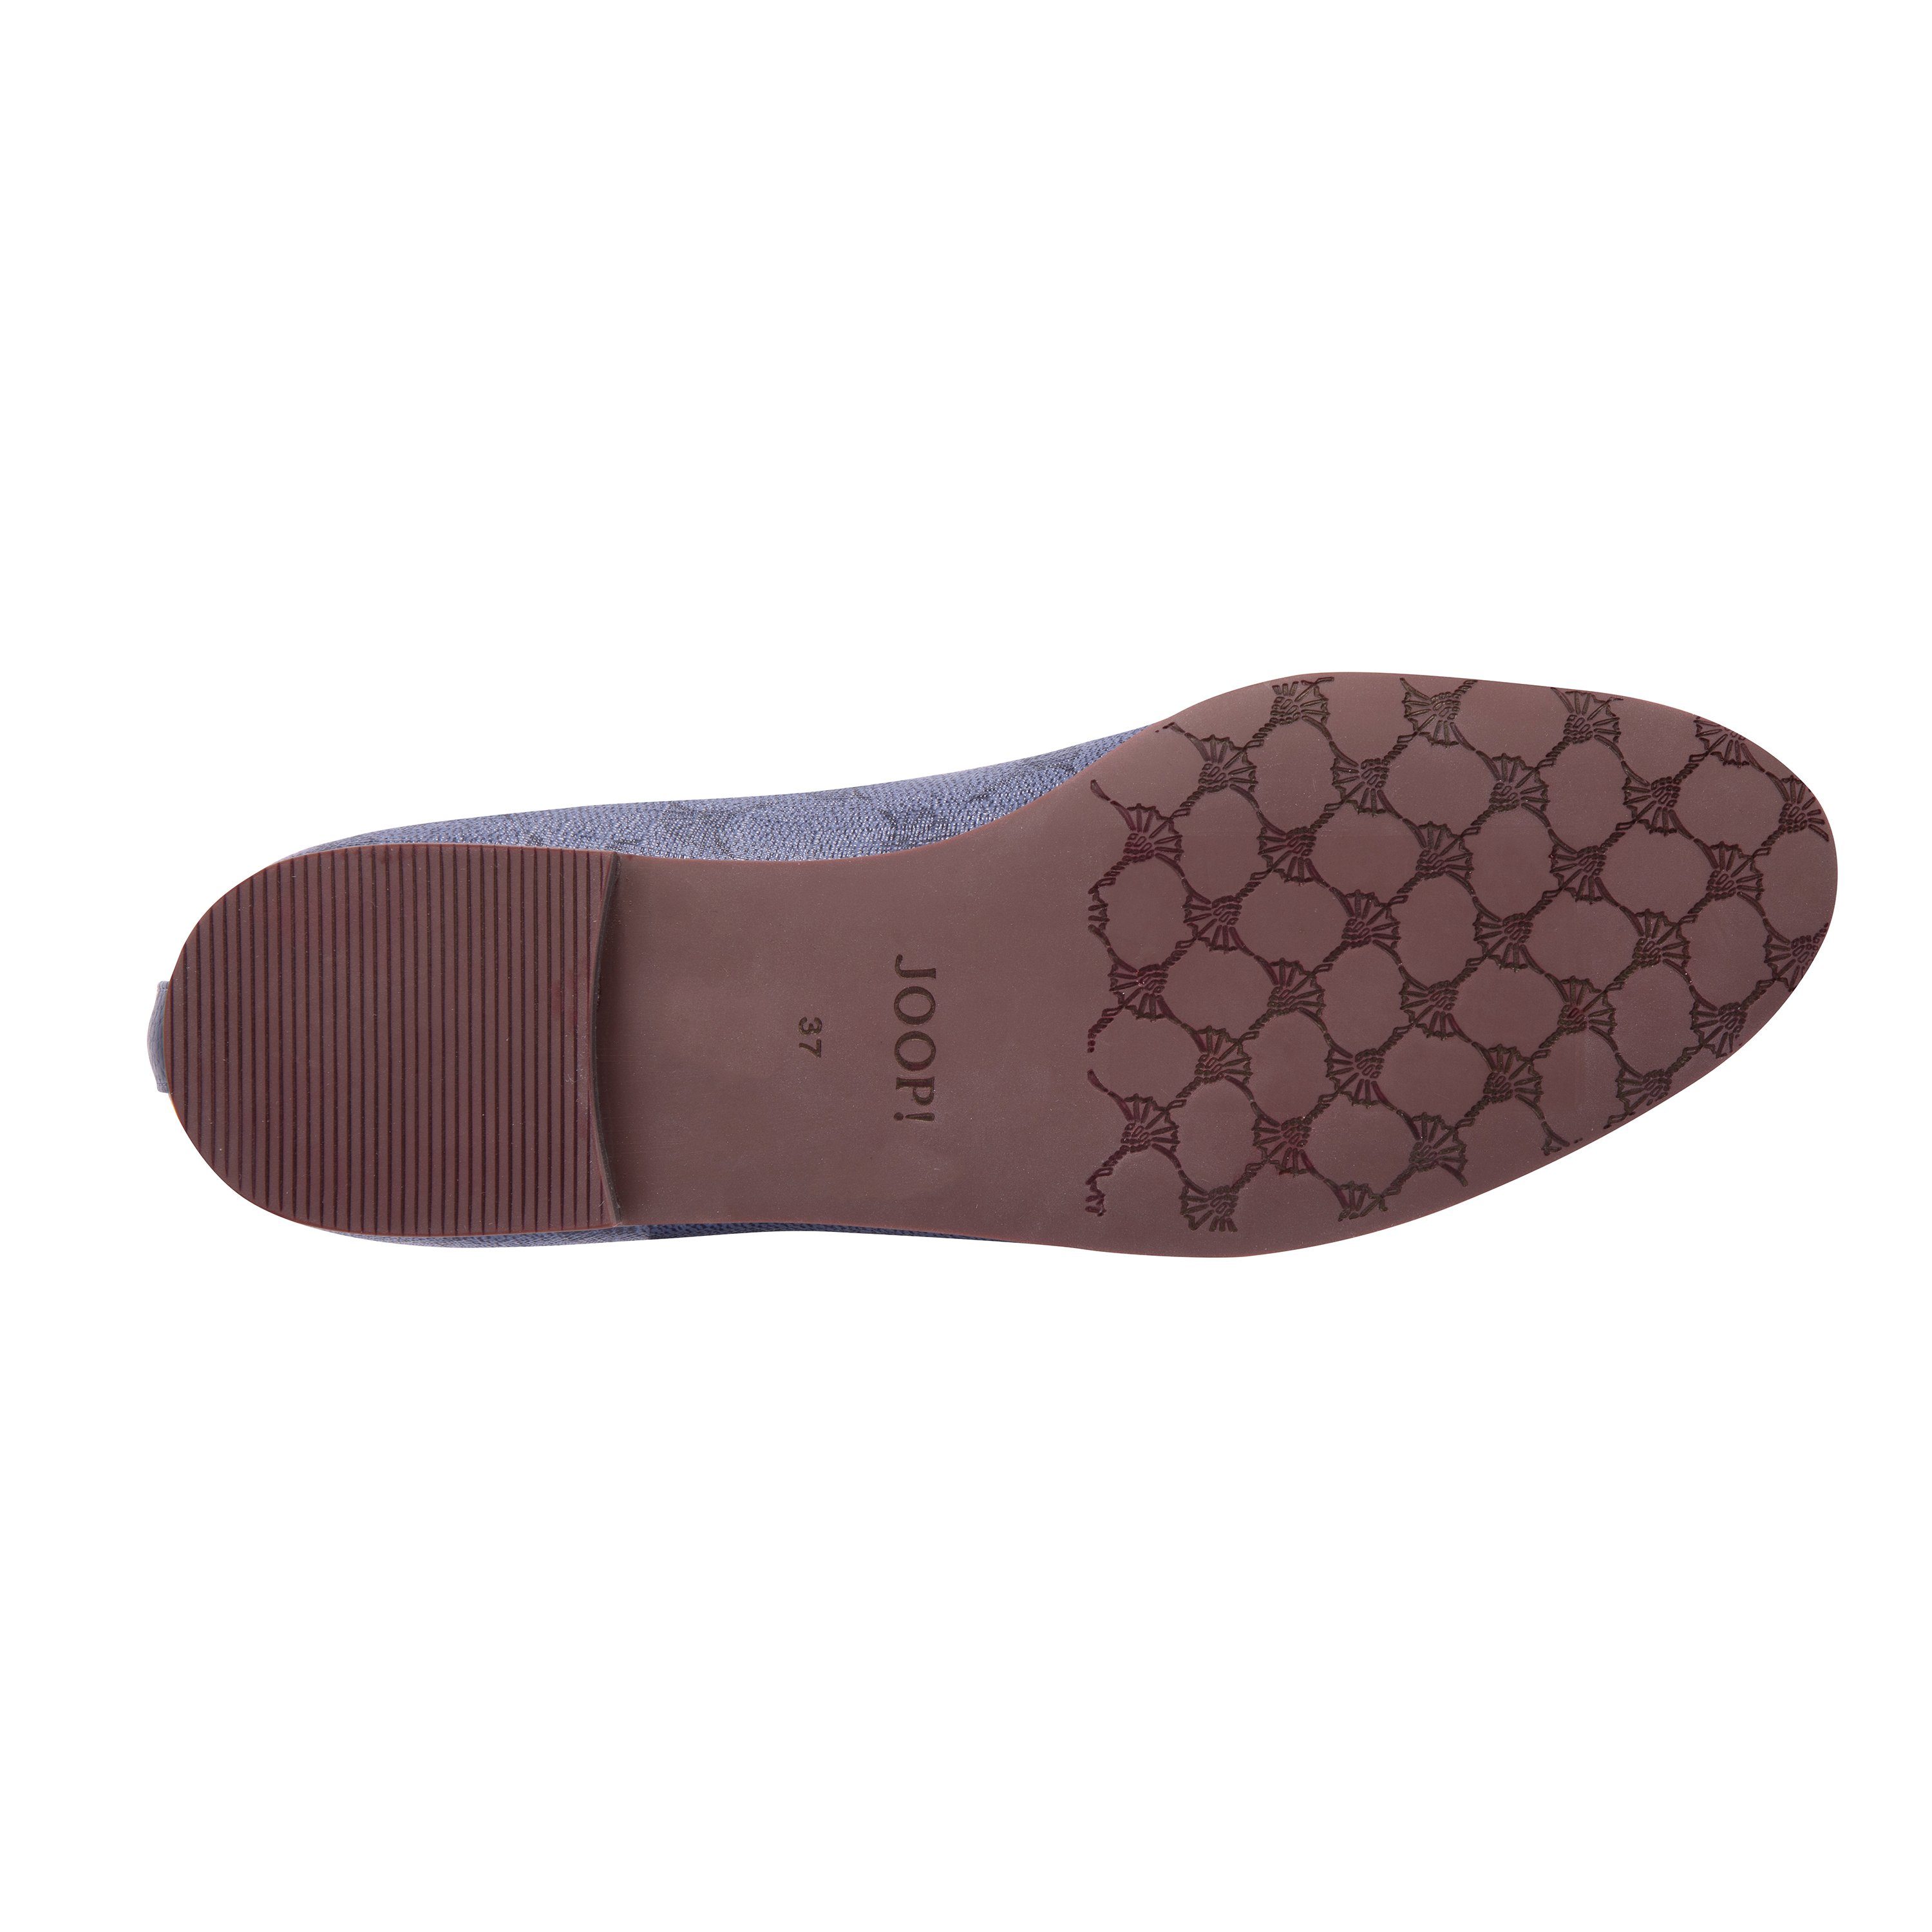 Slipper microfibre synthetic, Joop! medieval inner: outer: blue